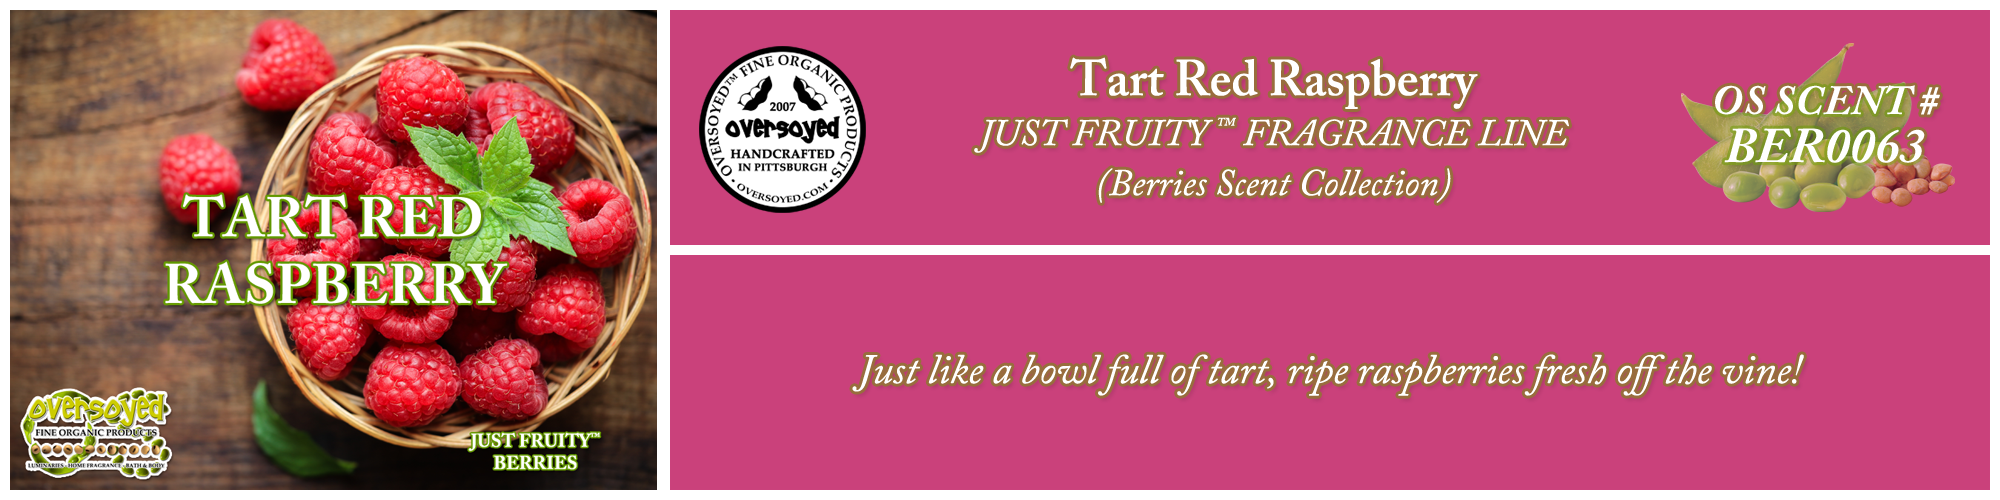 Tart Red Raspberry Handcrafted Products Collection